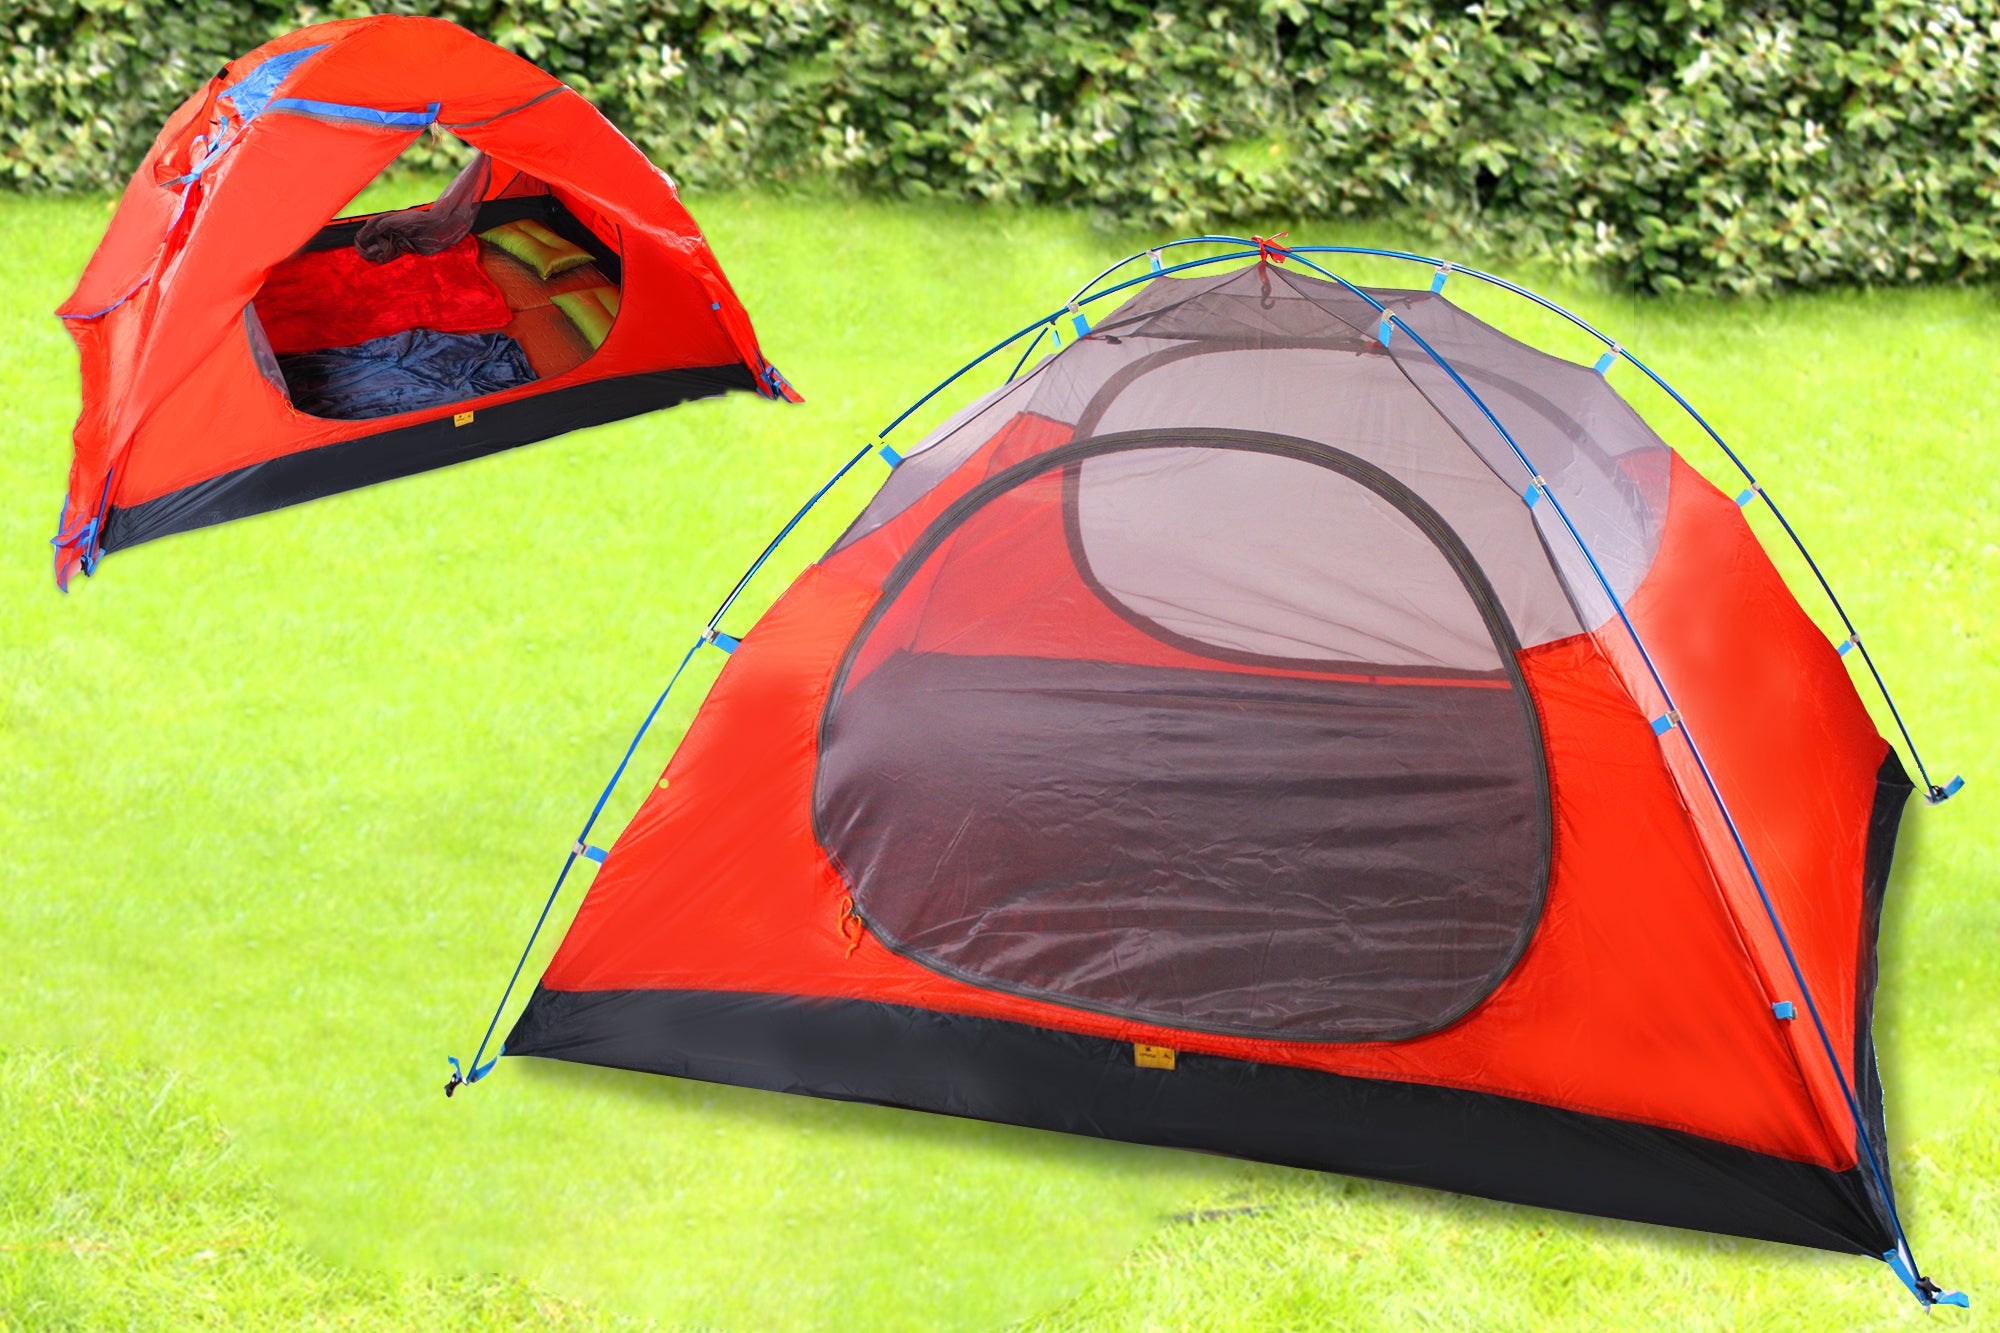 2 Sleepers Ventilated Dome Tent with Waterproof Night Cover